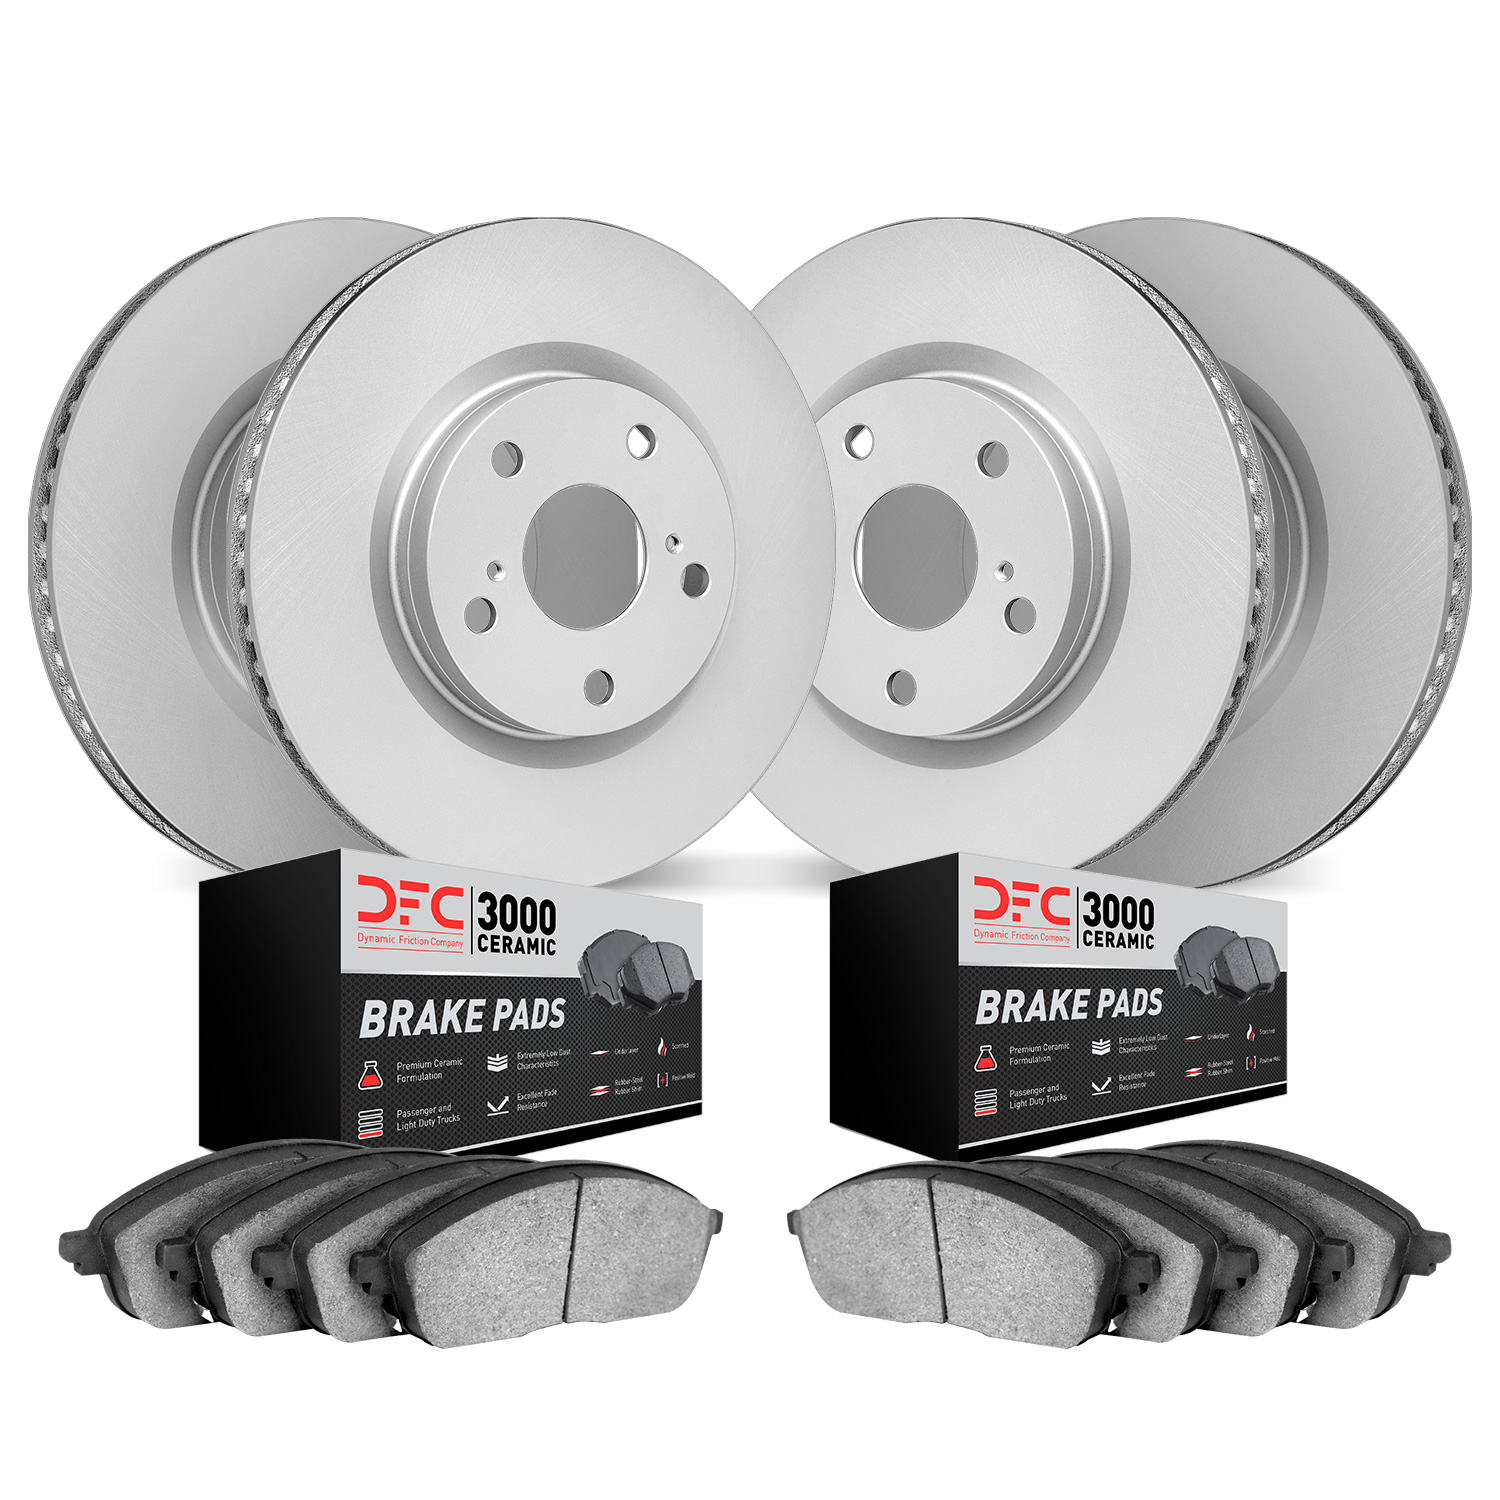 4304-68005 Geospec Brake Rotors with 3000-Series Ceramic Brake Pads Kit, 2008-2020 Infiniti/Nissan, Position: Front and Rear